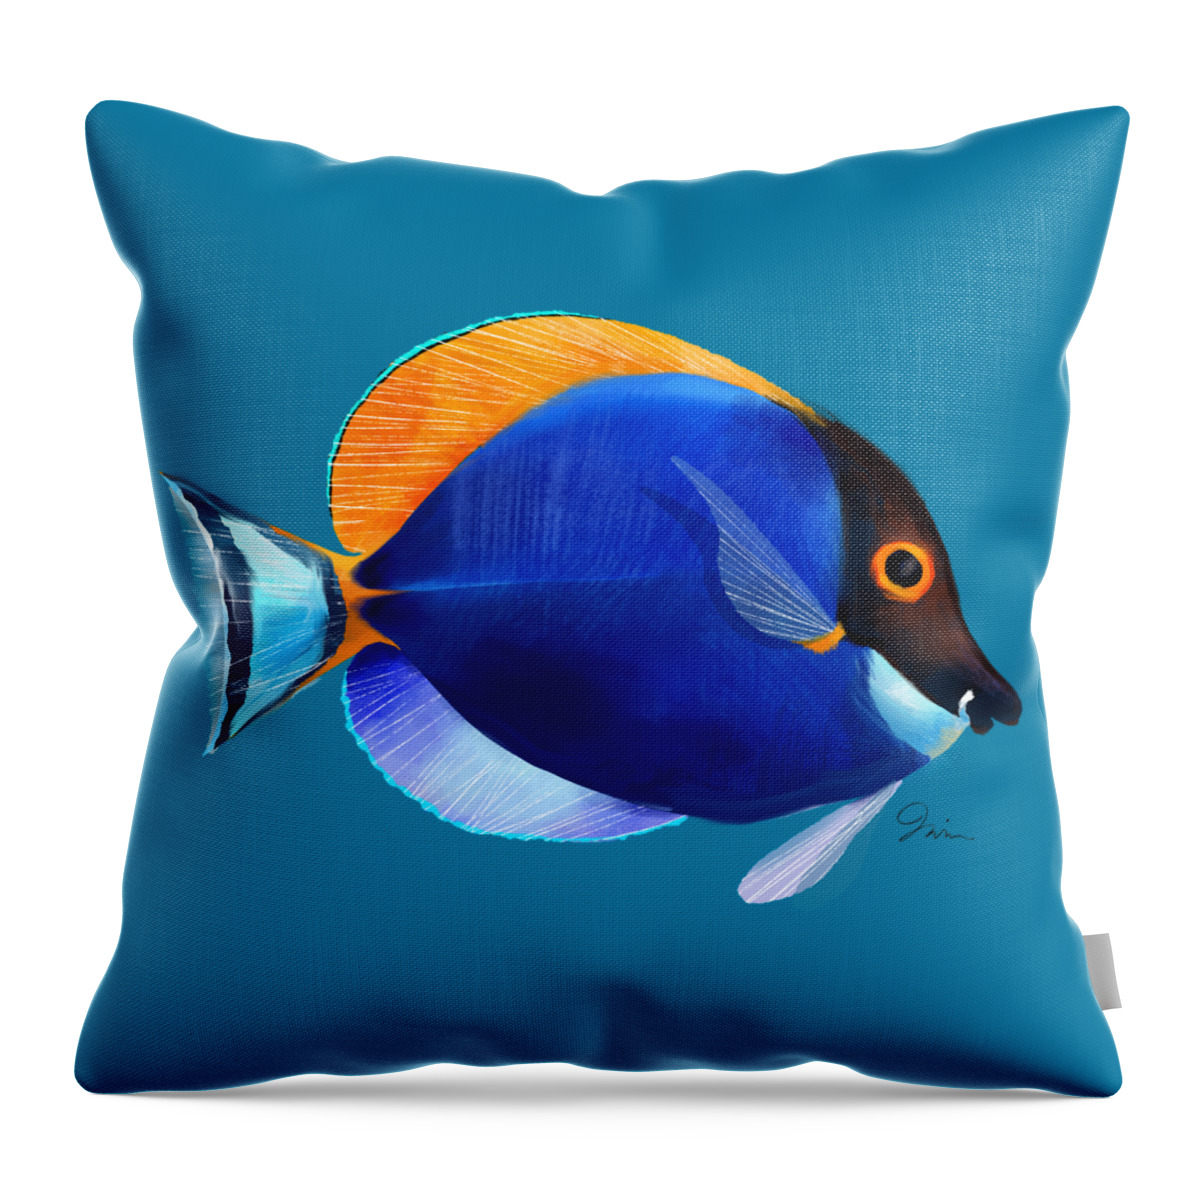 Powdered Blue Tang Throw Pillow featuring the digital art Powdered Blue Tang by Trevor Irvin